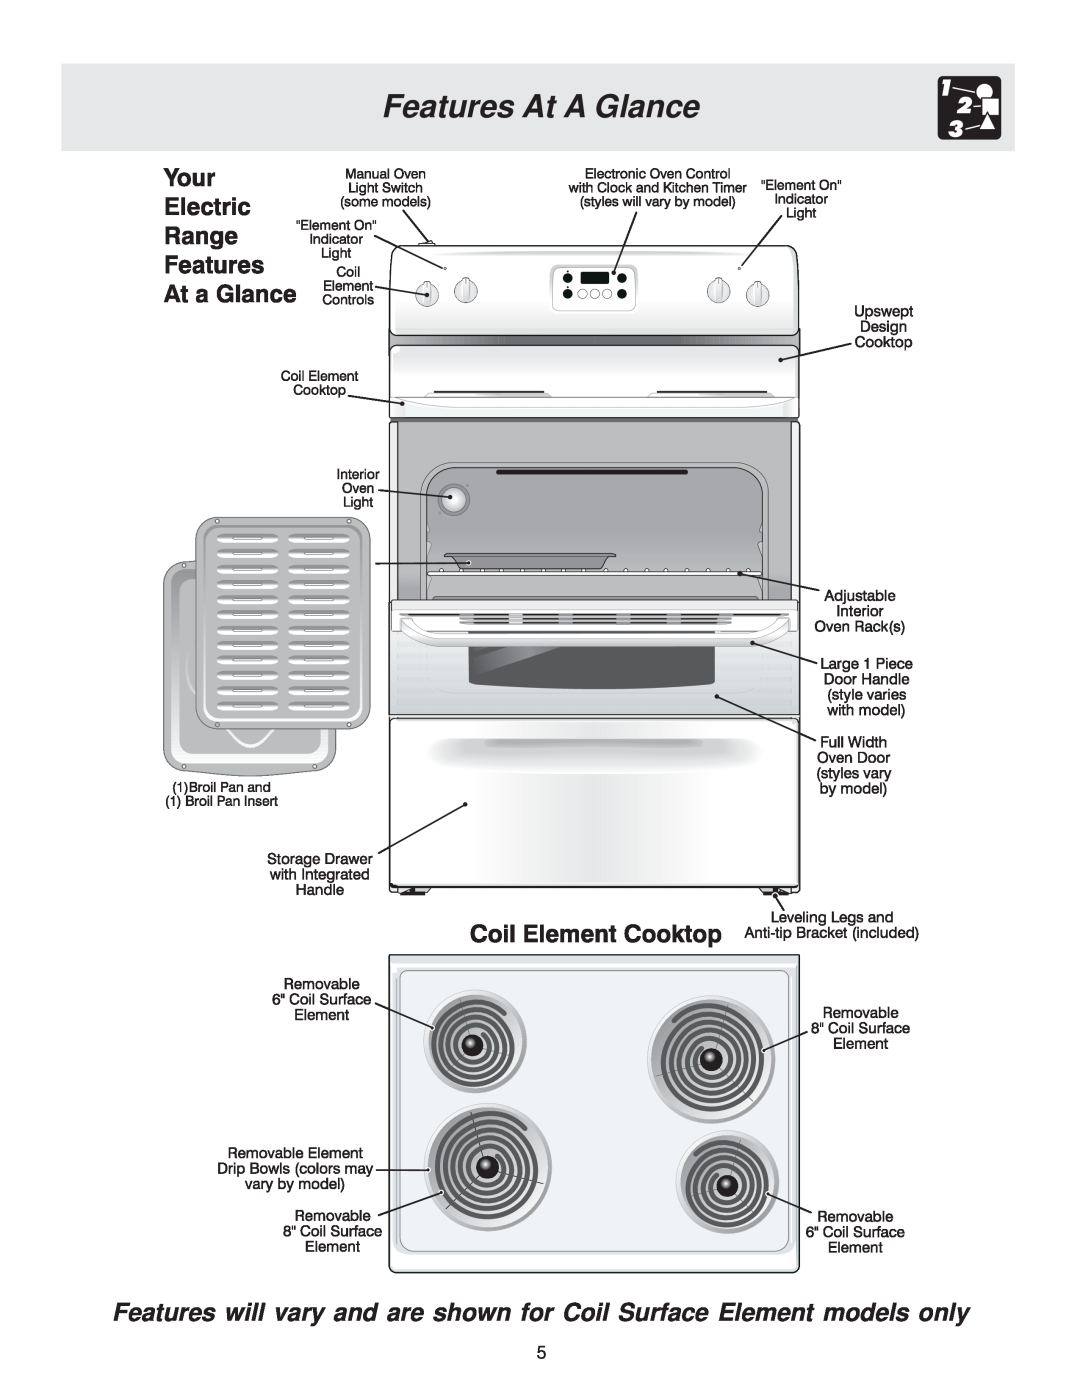 Frigidaire 316257114 manual Features At A Glance, Features will vary and are shown for Coil Surface Element models only 